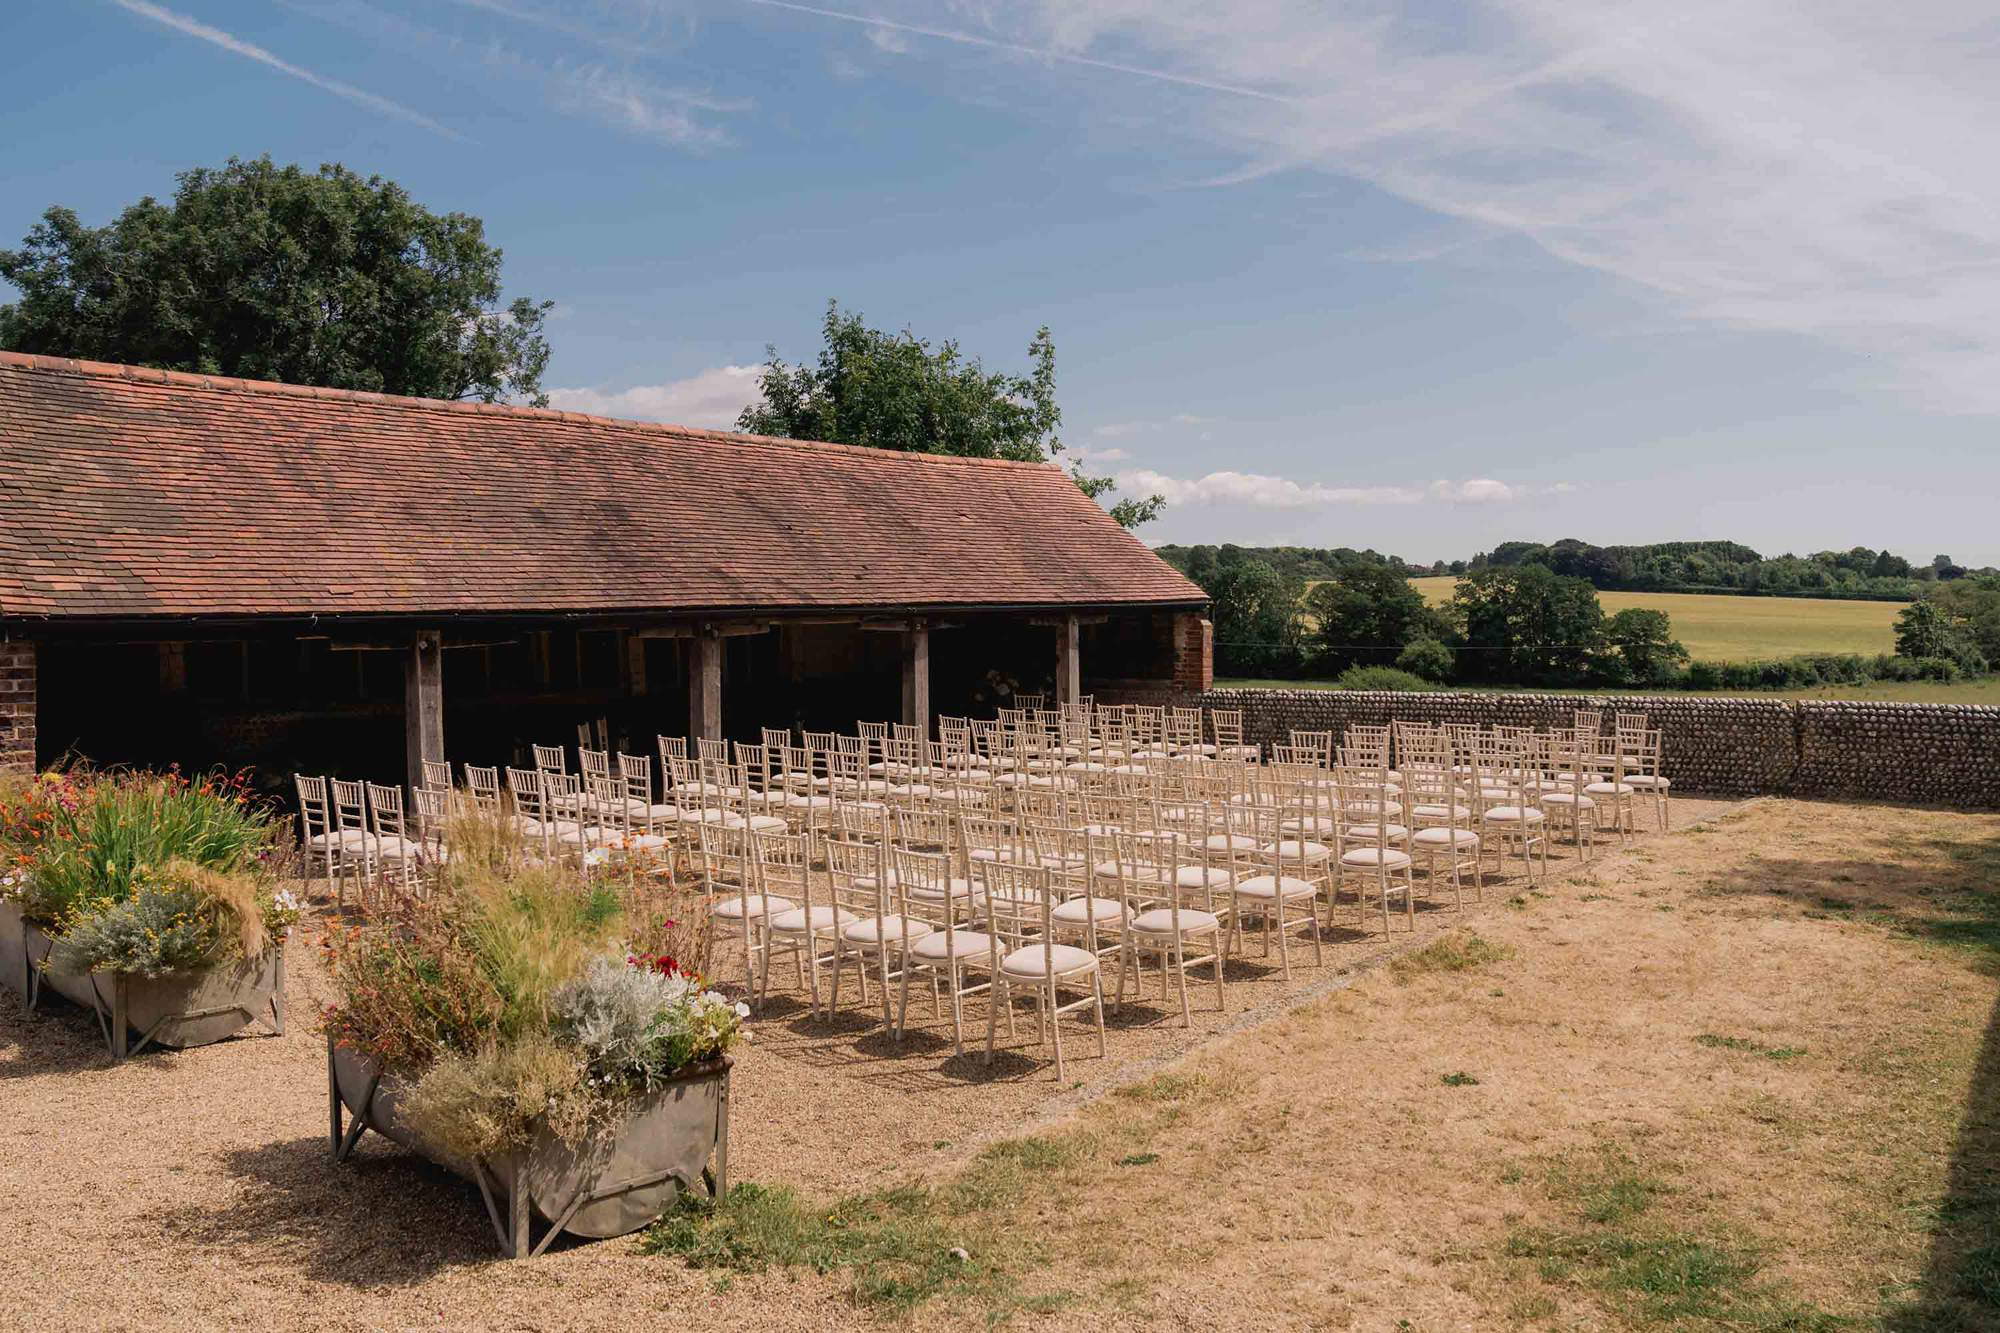 Outdoor wedding ceremony set up at the Sussex Barn wedding venue in Hellingly.